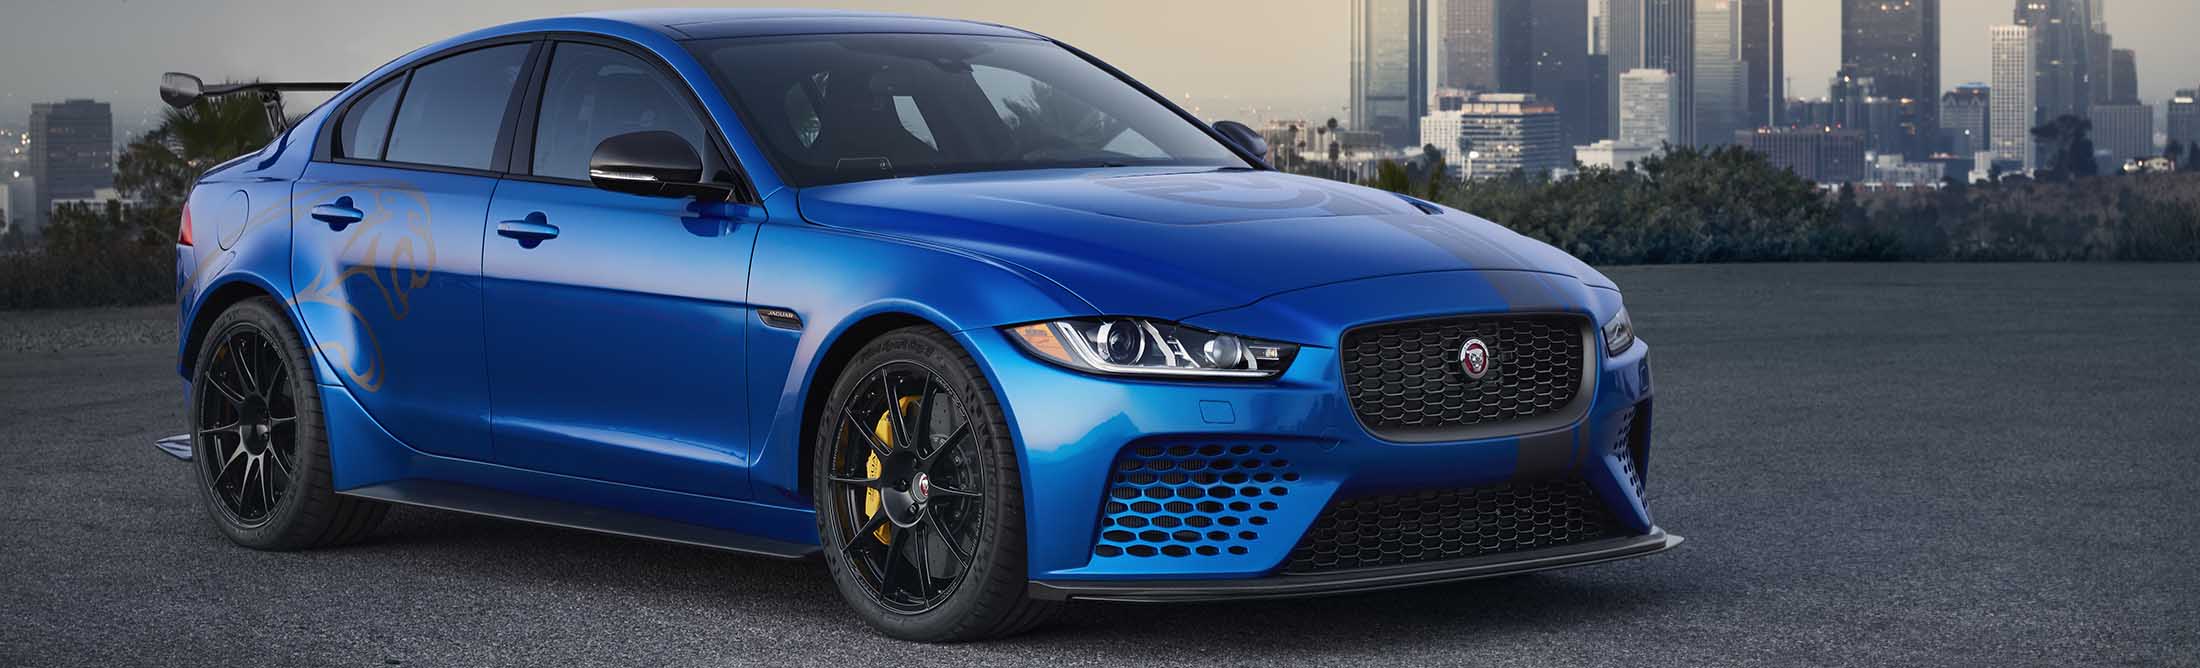 Jaguar XE SV Project 8 Review: A Life-Size Hot Wheels You'll Love -  Bloomberg